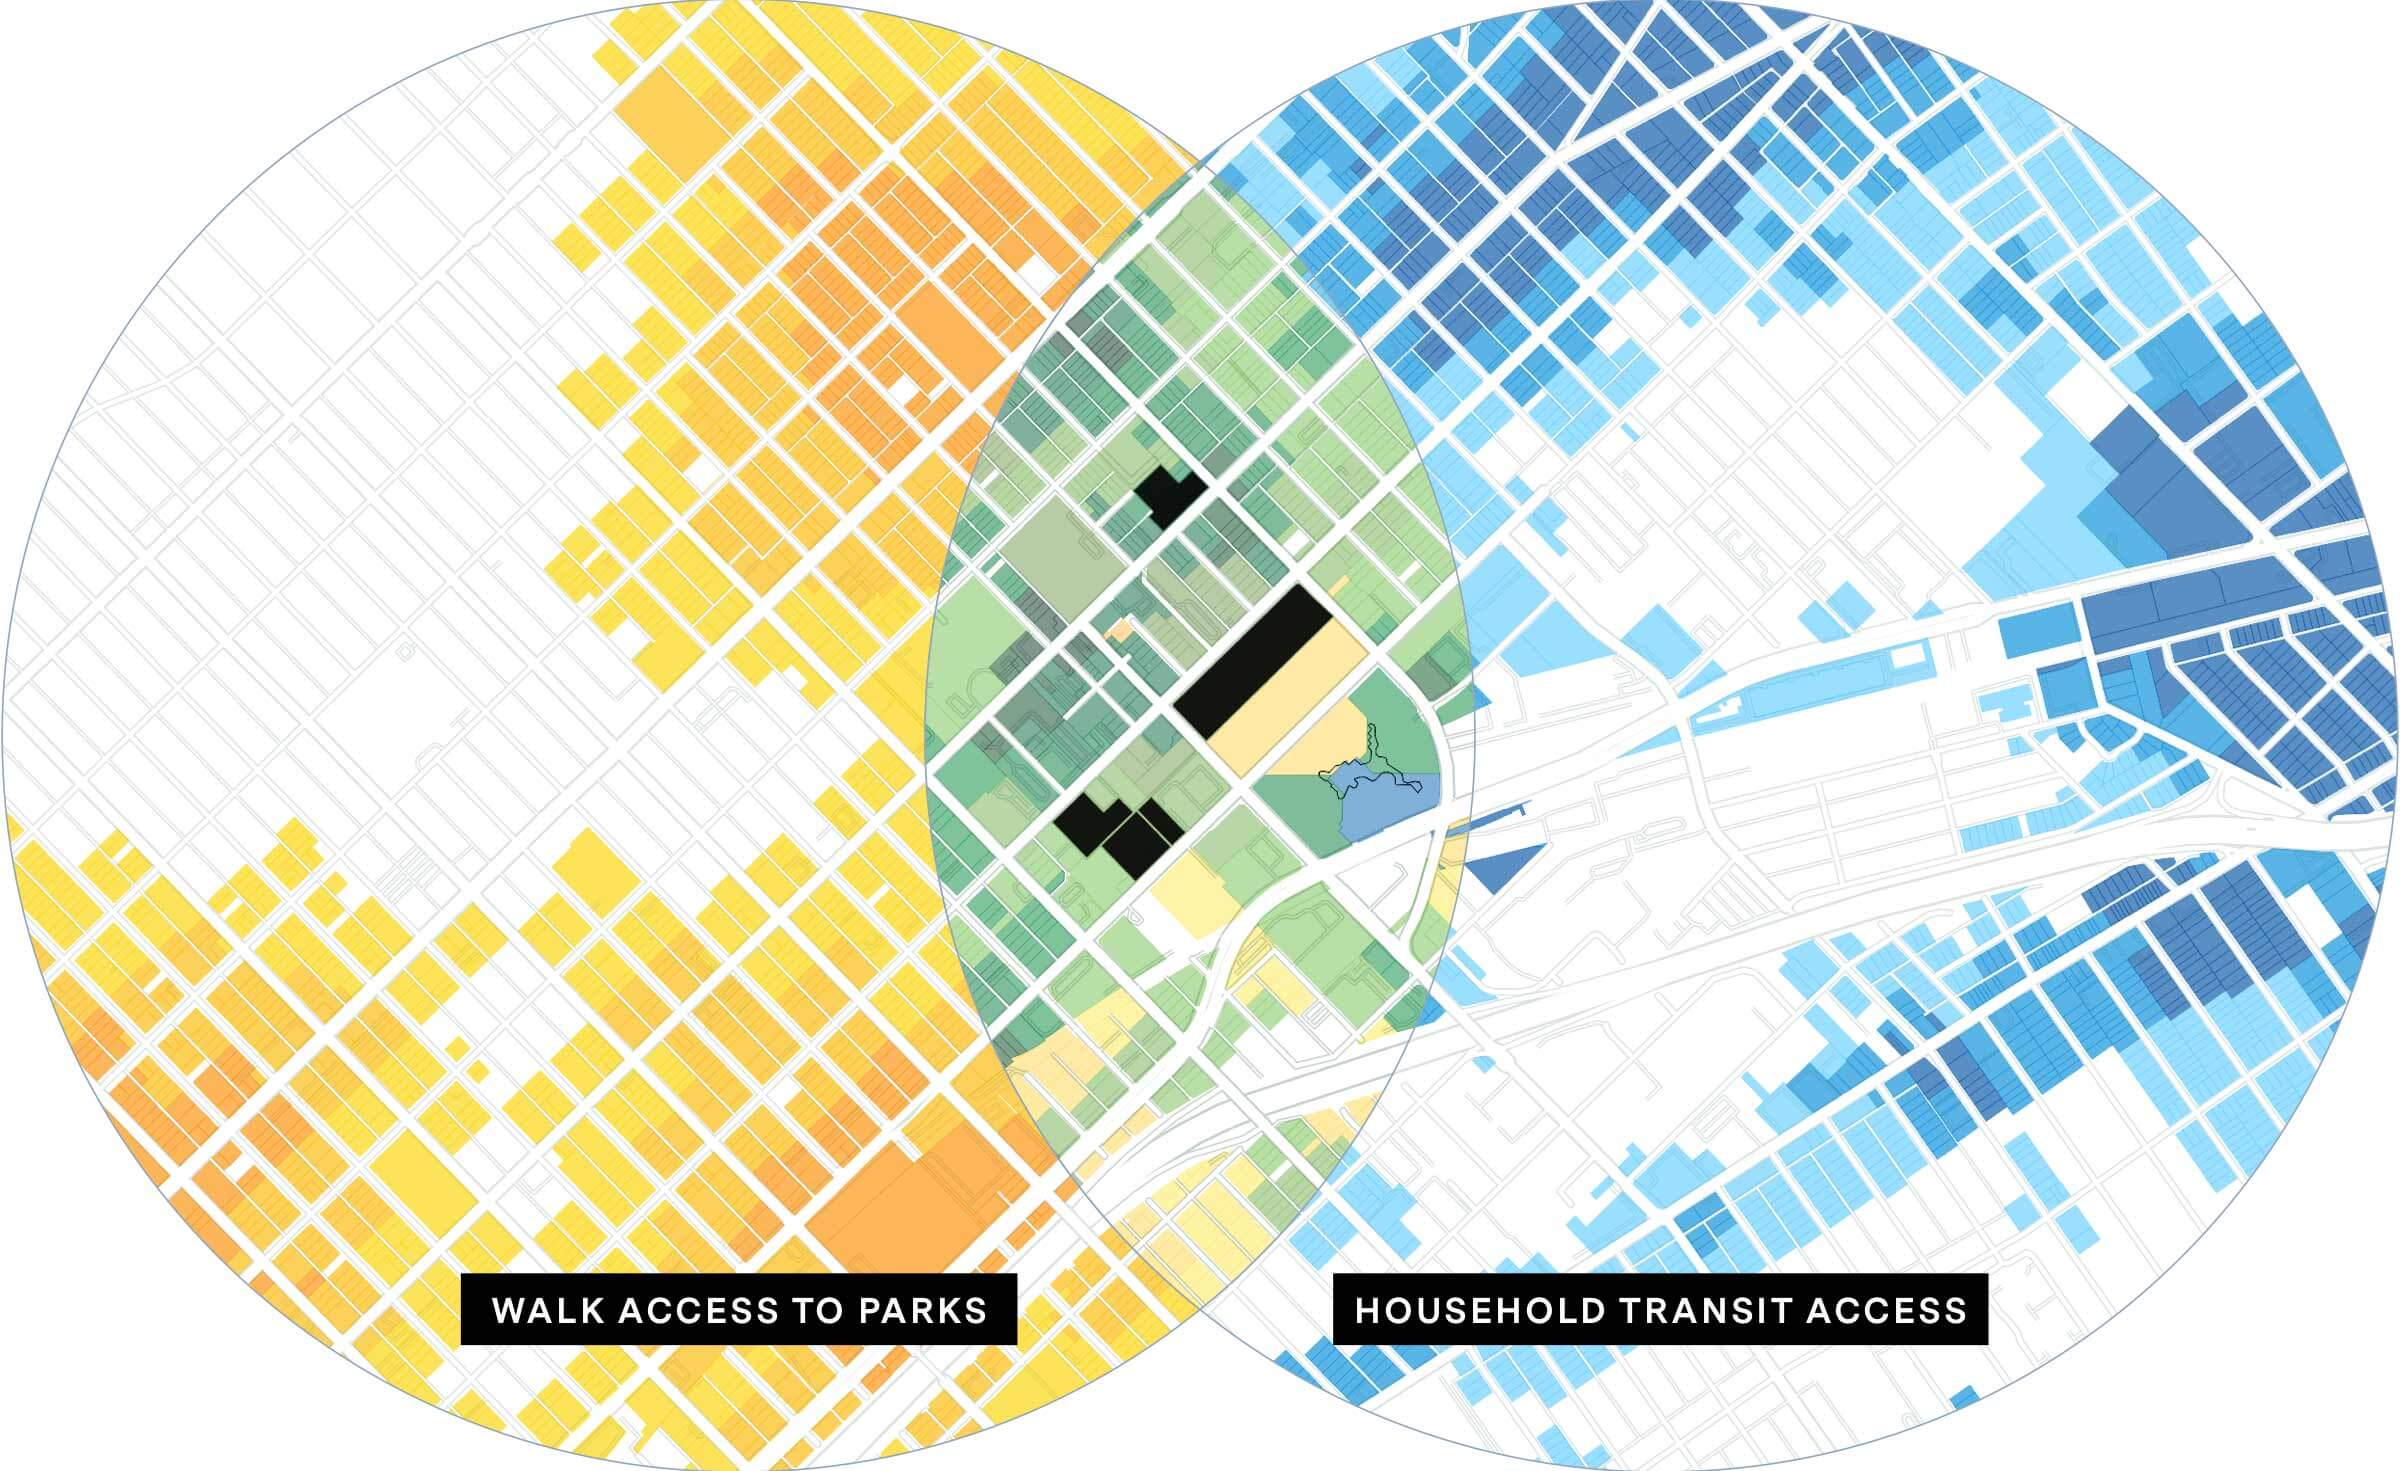 Overlapping maps showing walk access and transit access